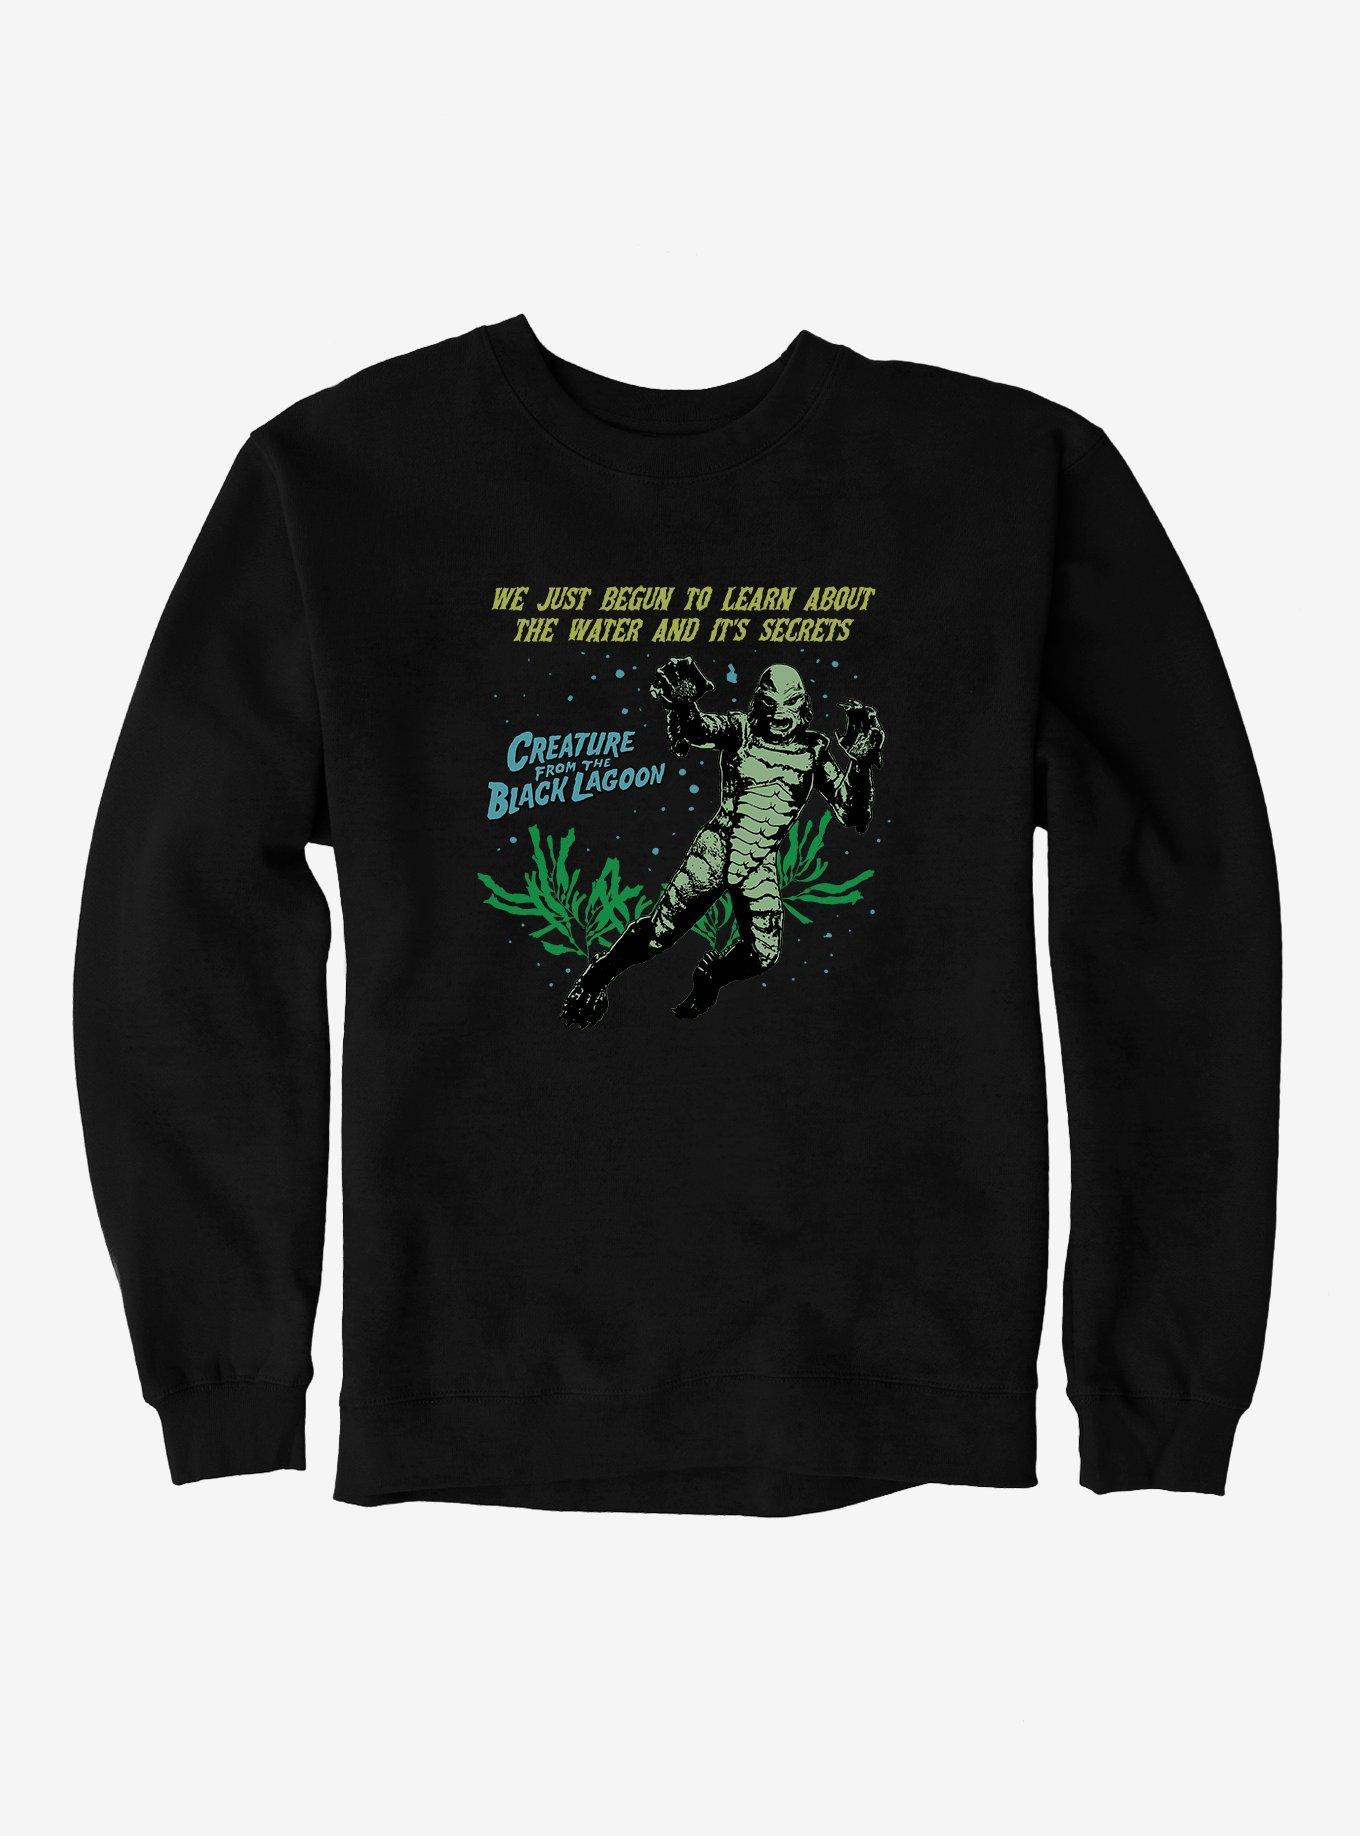 Creature From The Black Lagoon Water And It's Secrets Sweatshirt, BLACK, hi-res